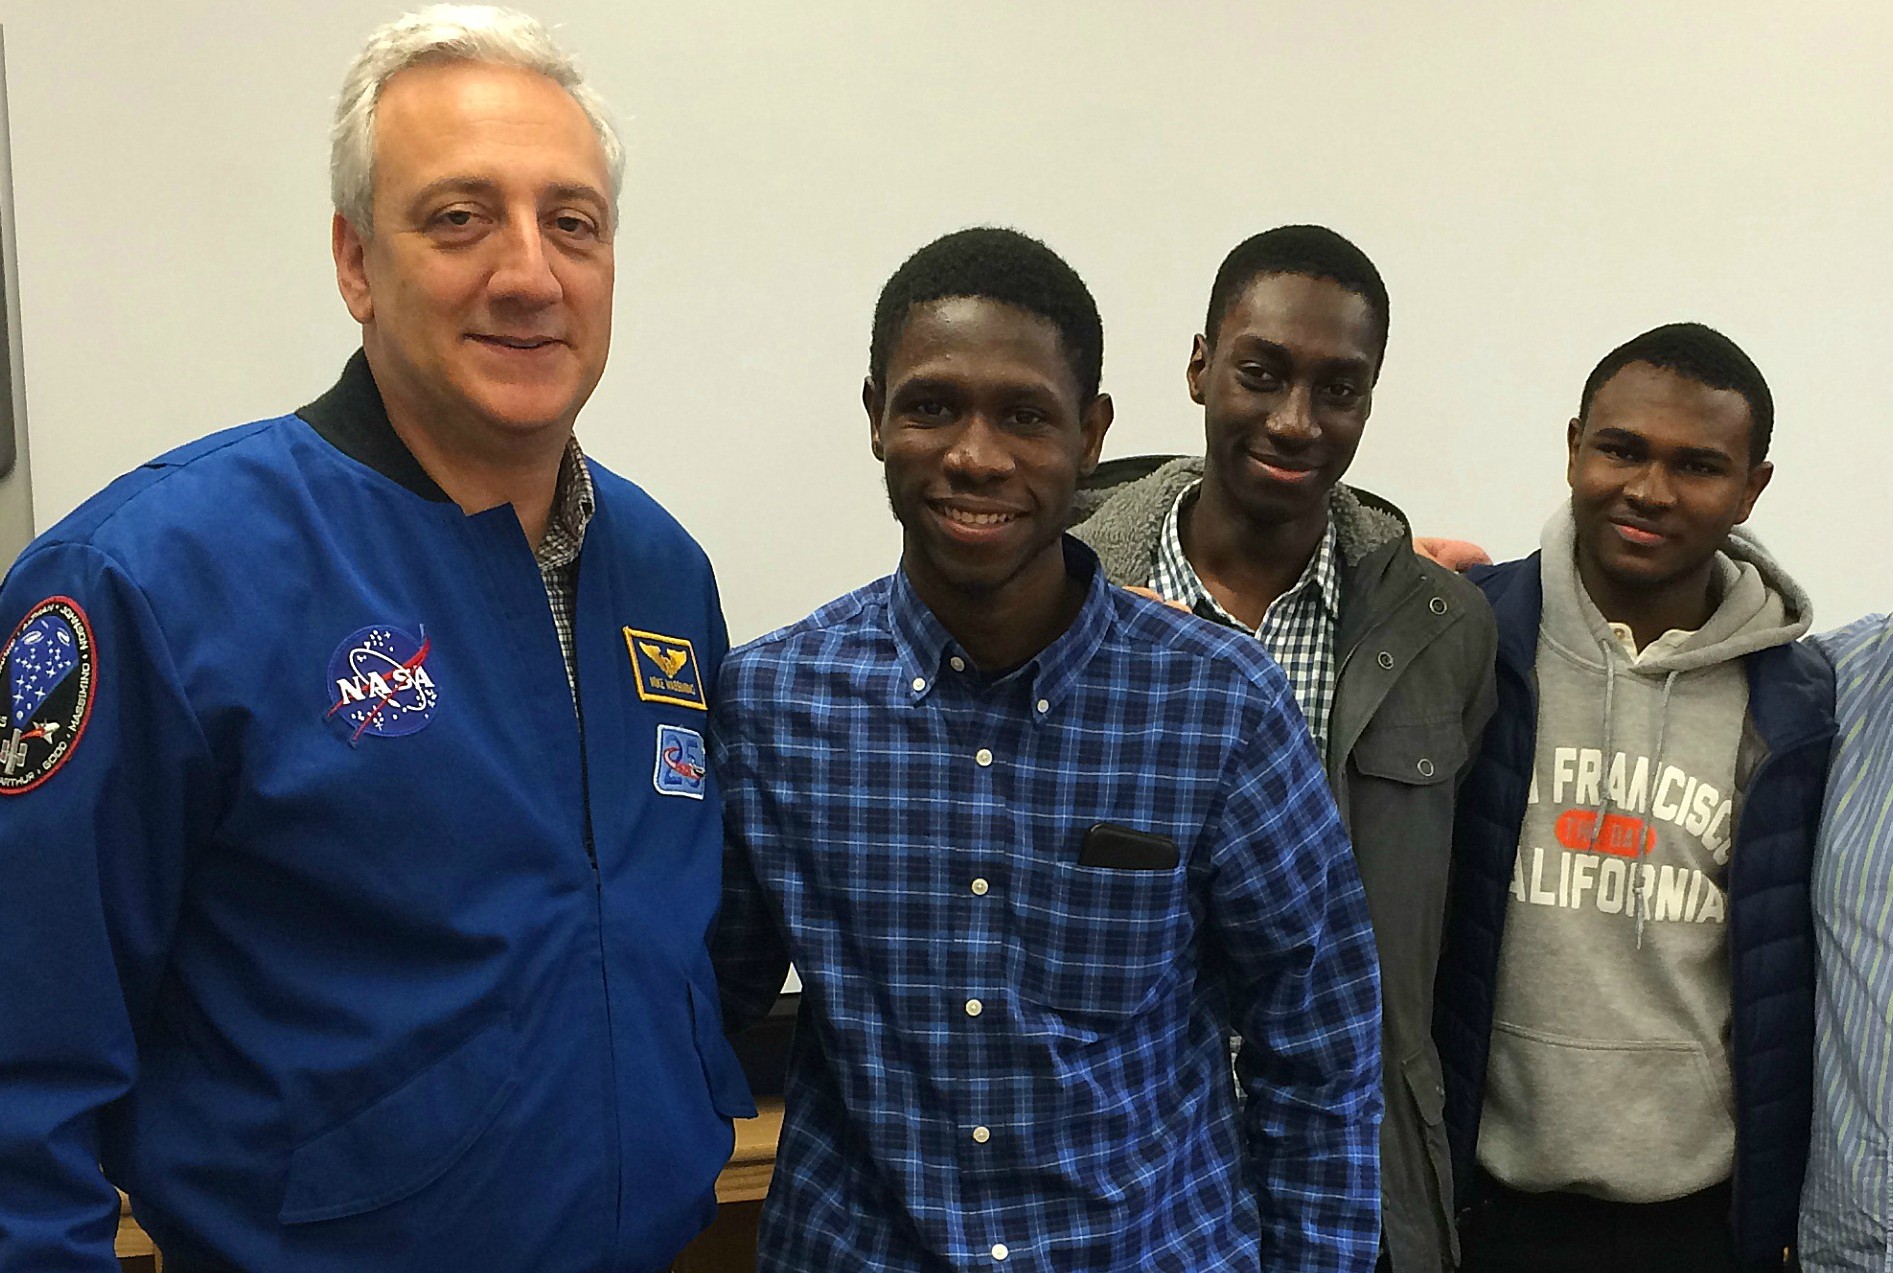 Professor and former NASA Astronaut Mike Massimino speaking with students from ELLIS Preparatory Academy.